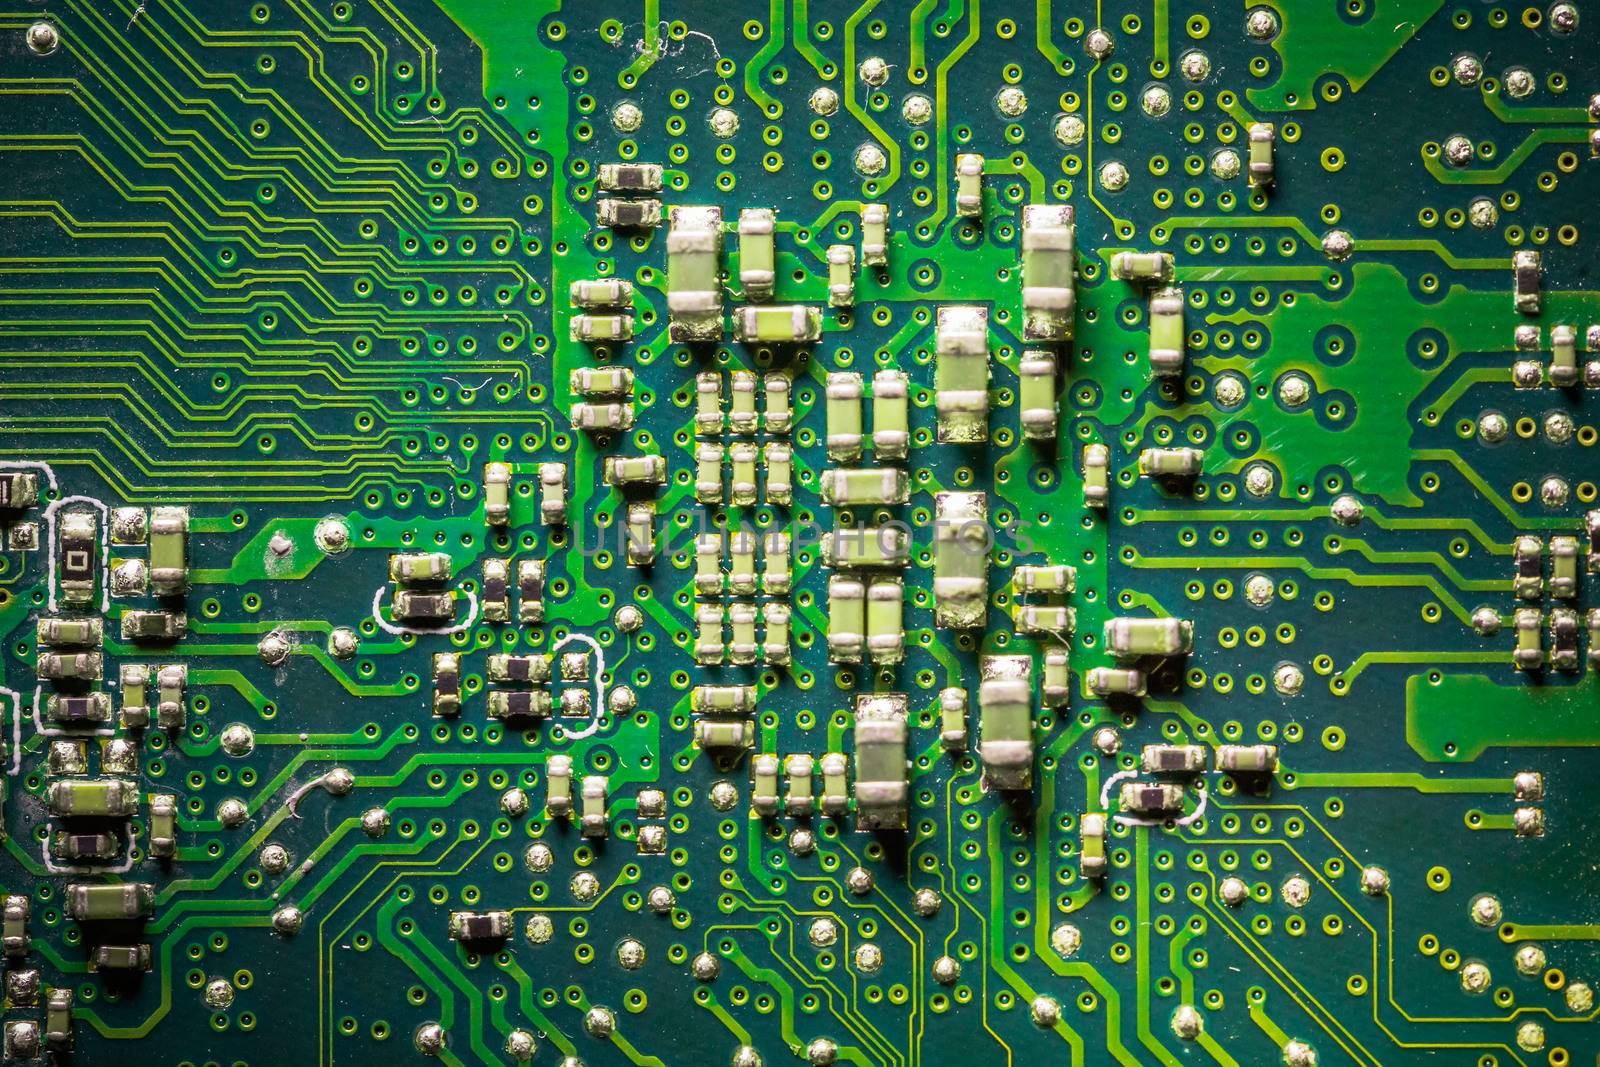 Close-up board with micro chips from an electrical appliance or computer. Concept of modern technology. Concept of electronics and microchips